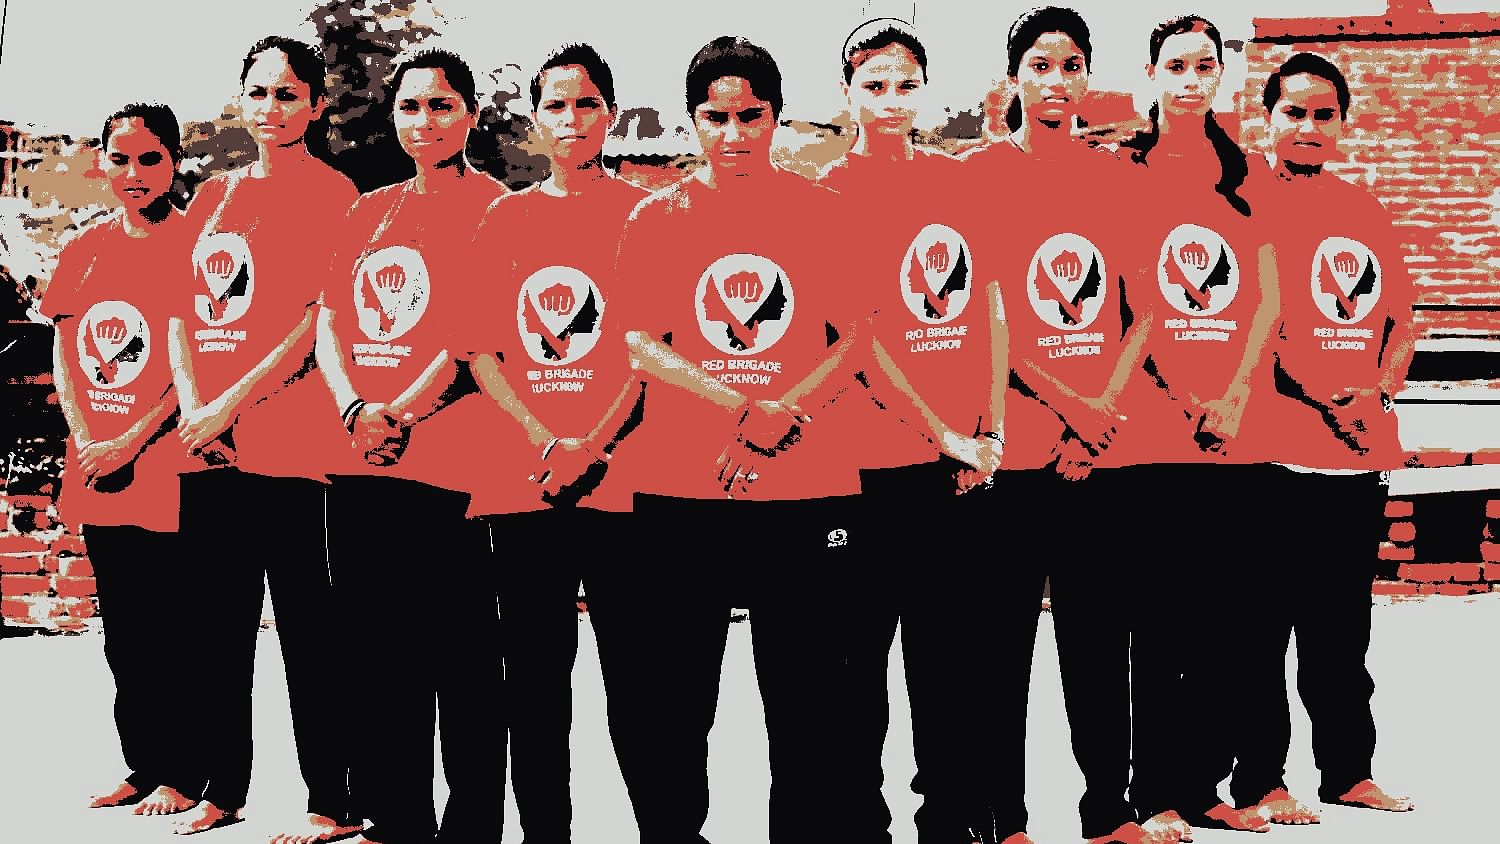 The Red Brigade. (Photo Treatment: The Quint)